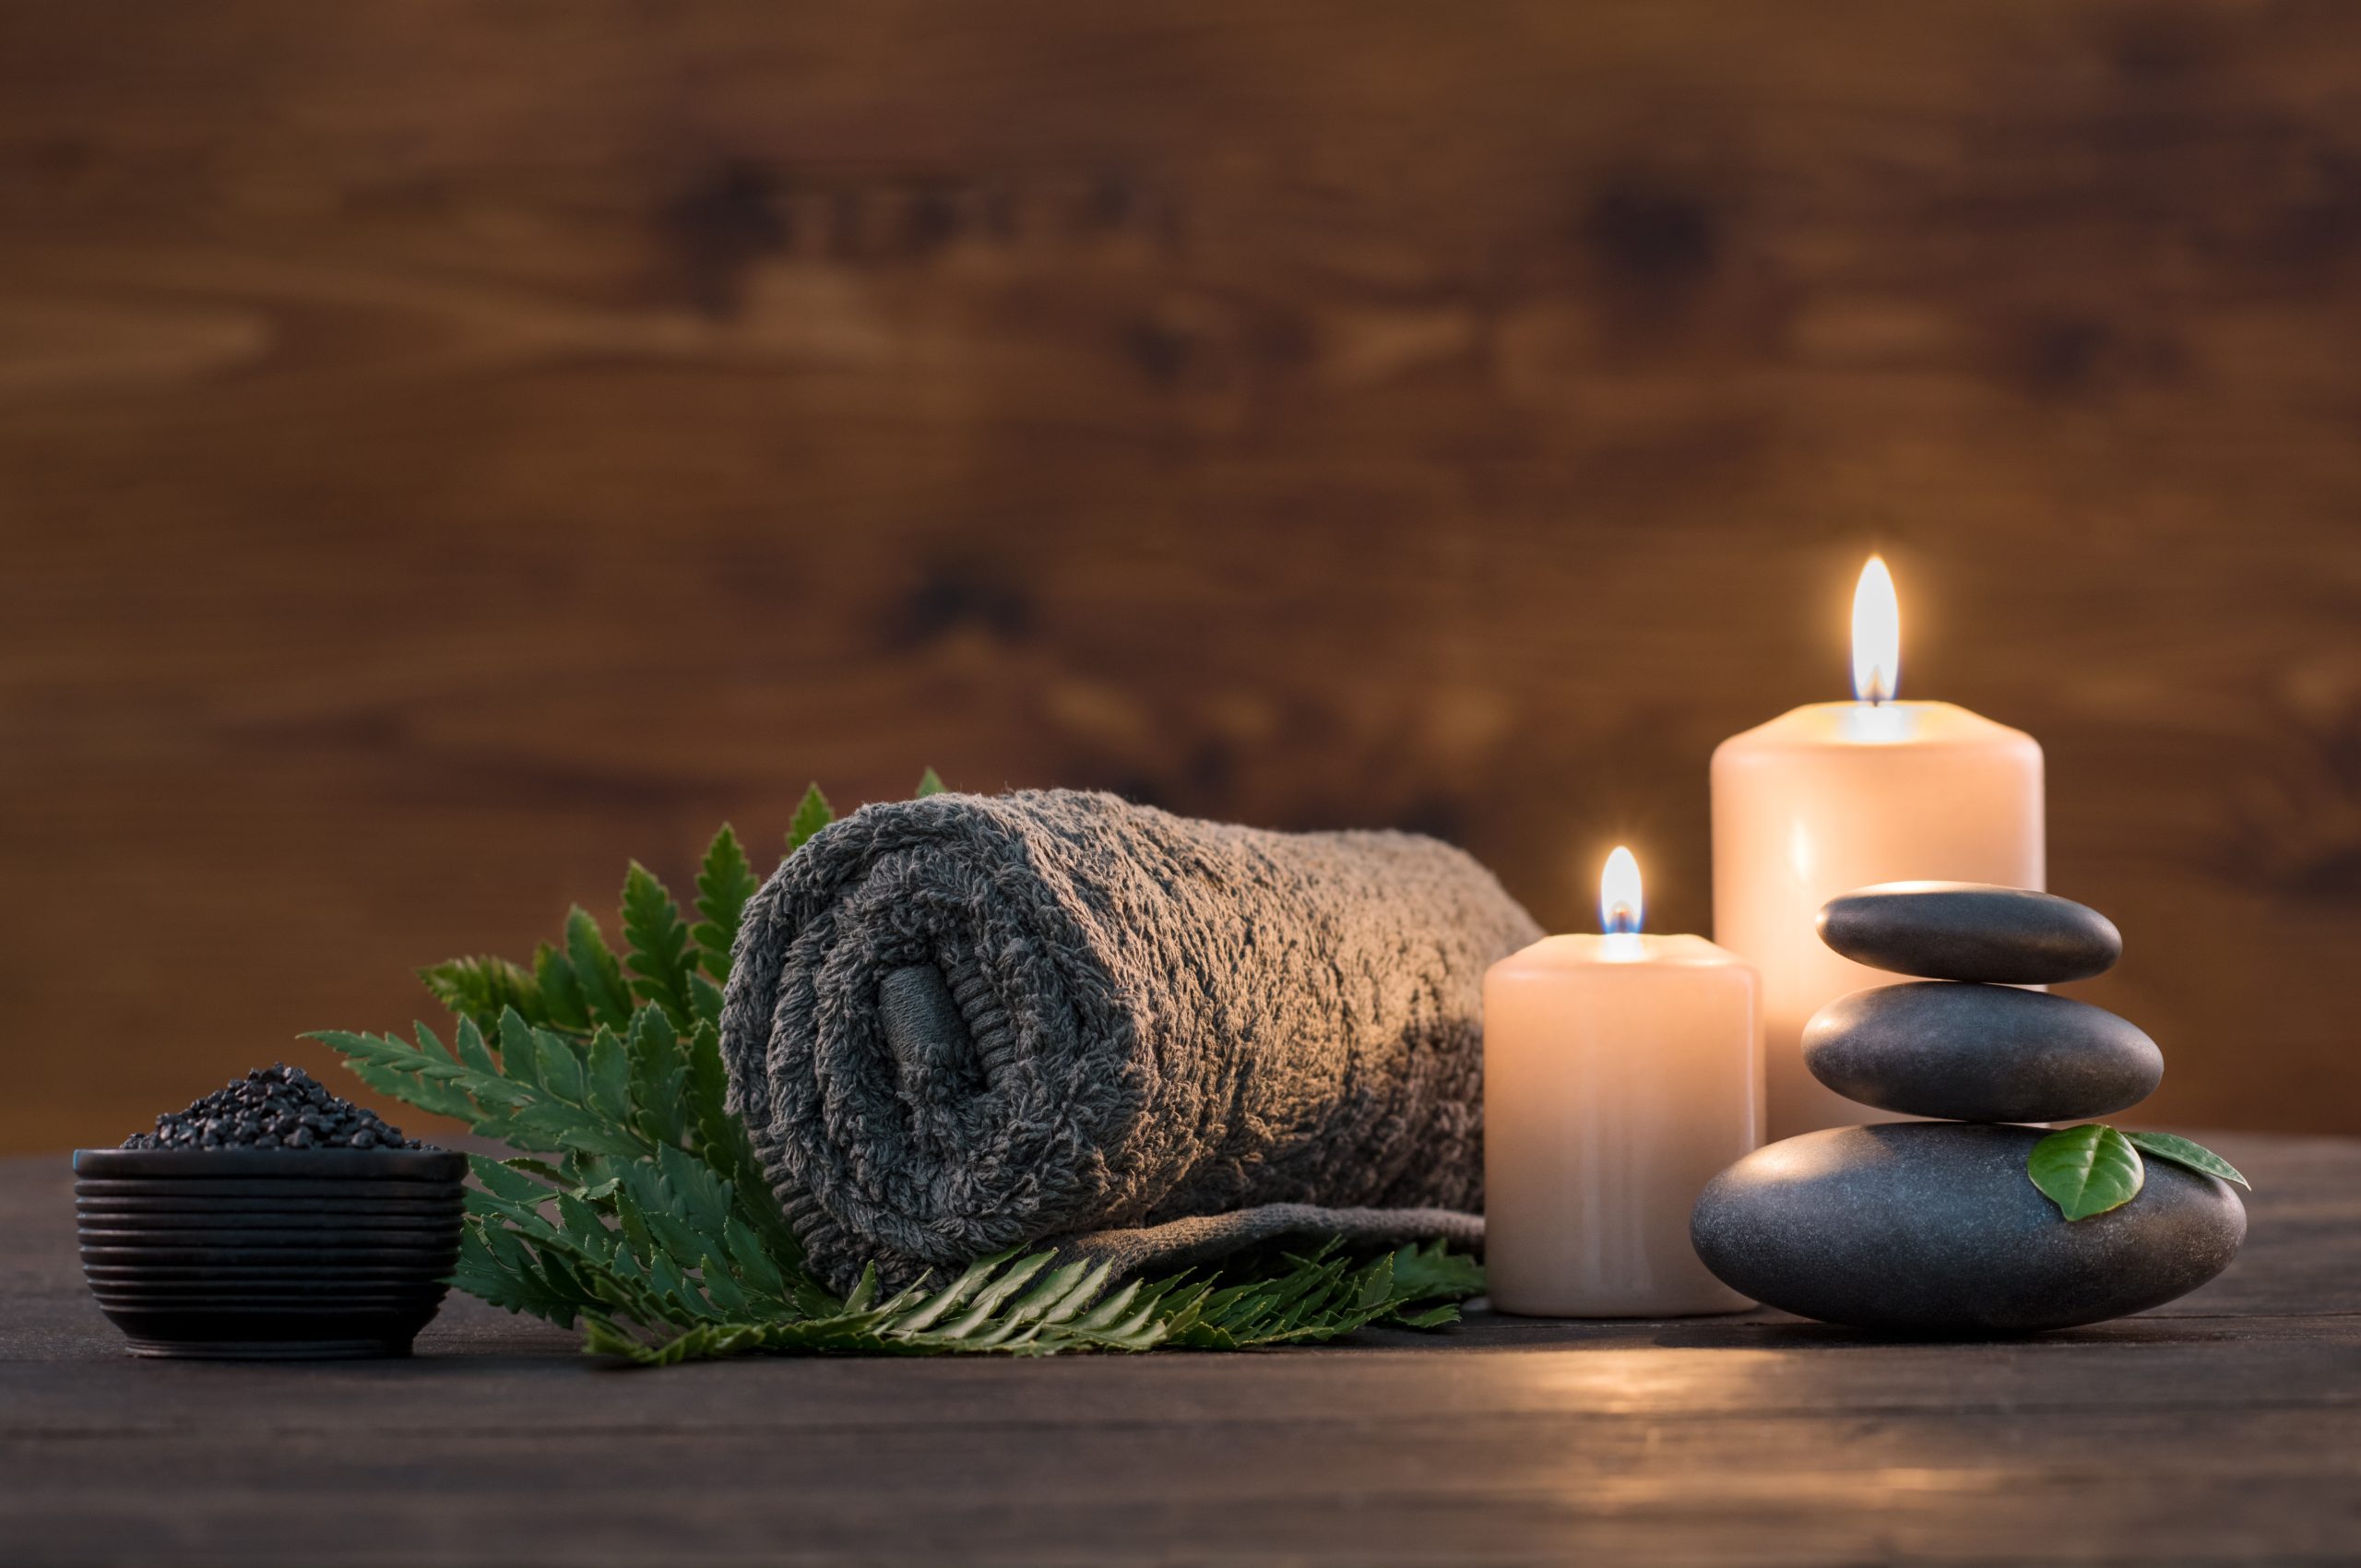 Towel,On,Fern,With,Candles,And,Black,Hot,Stone,On